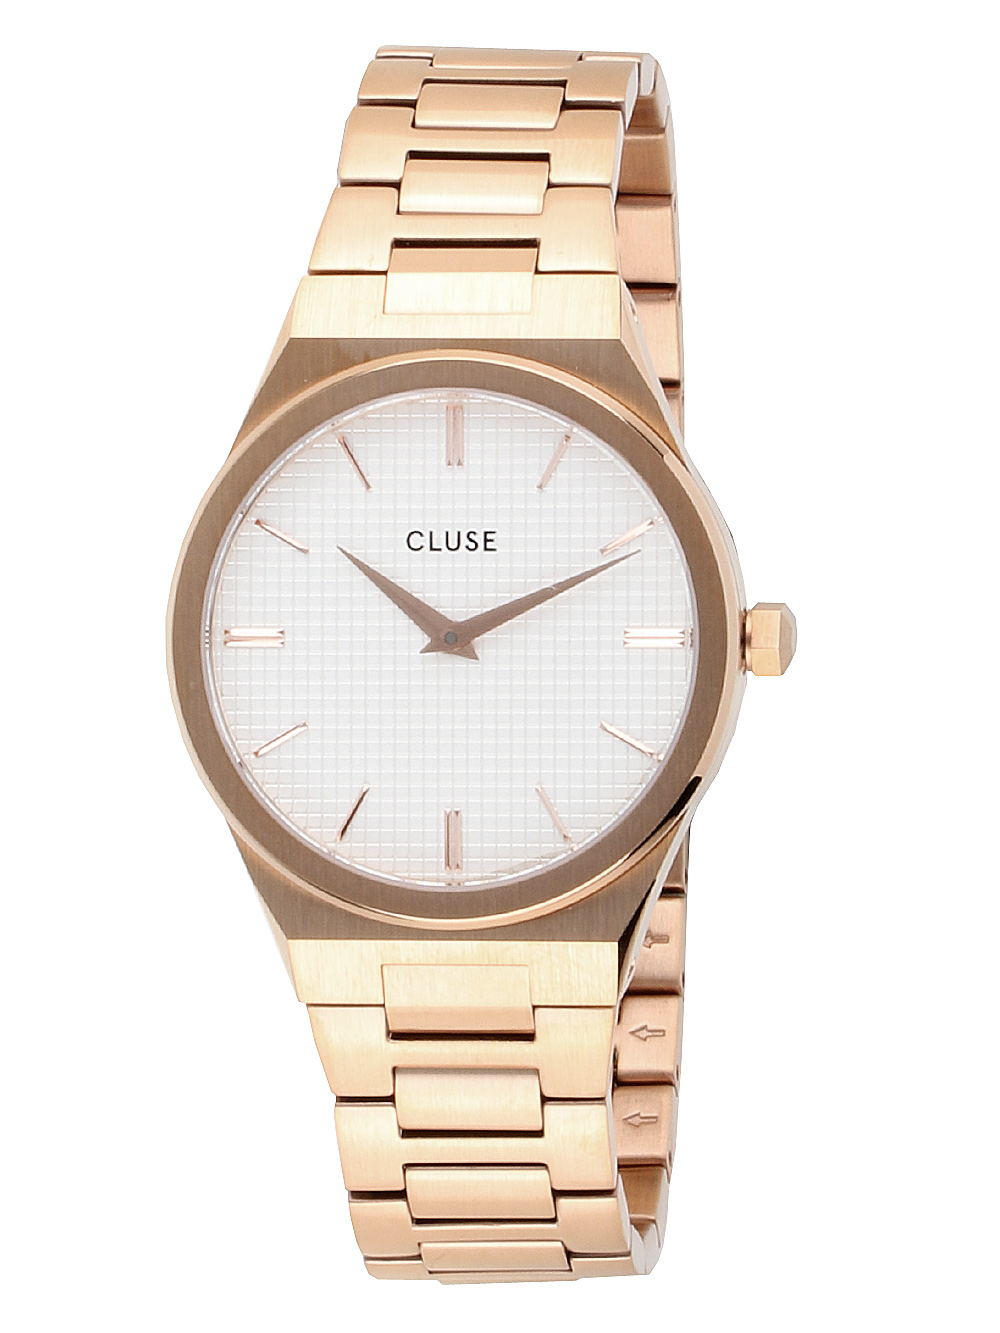 Cluse watch repairs in London